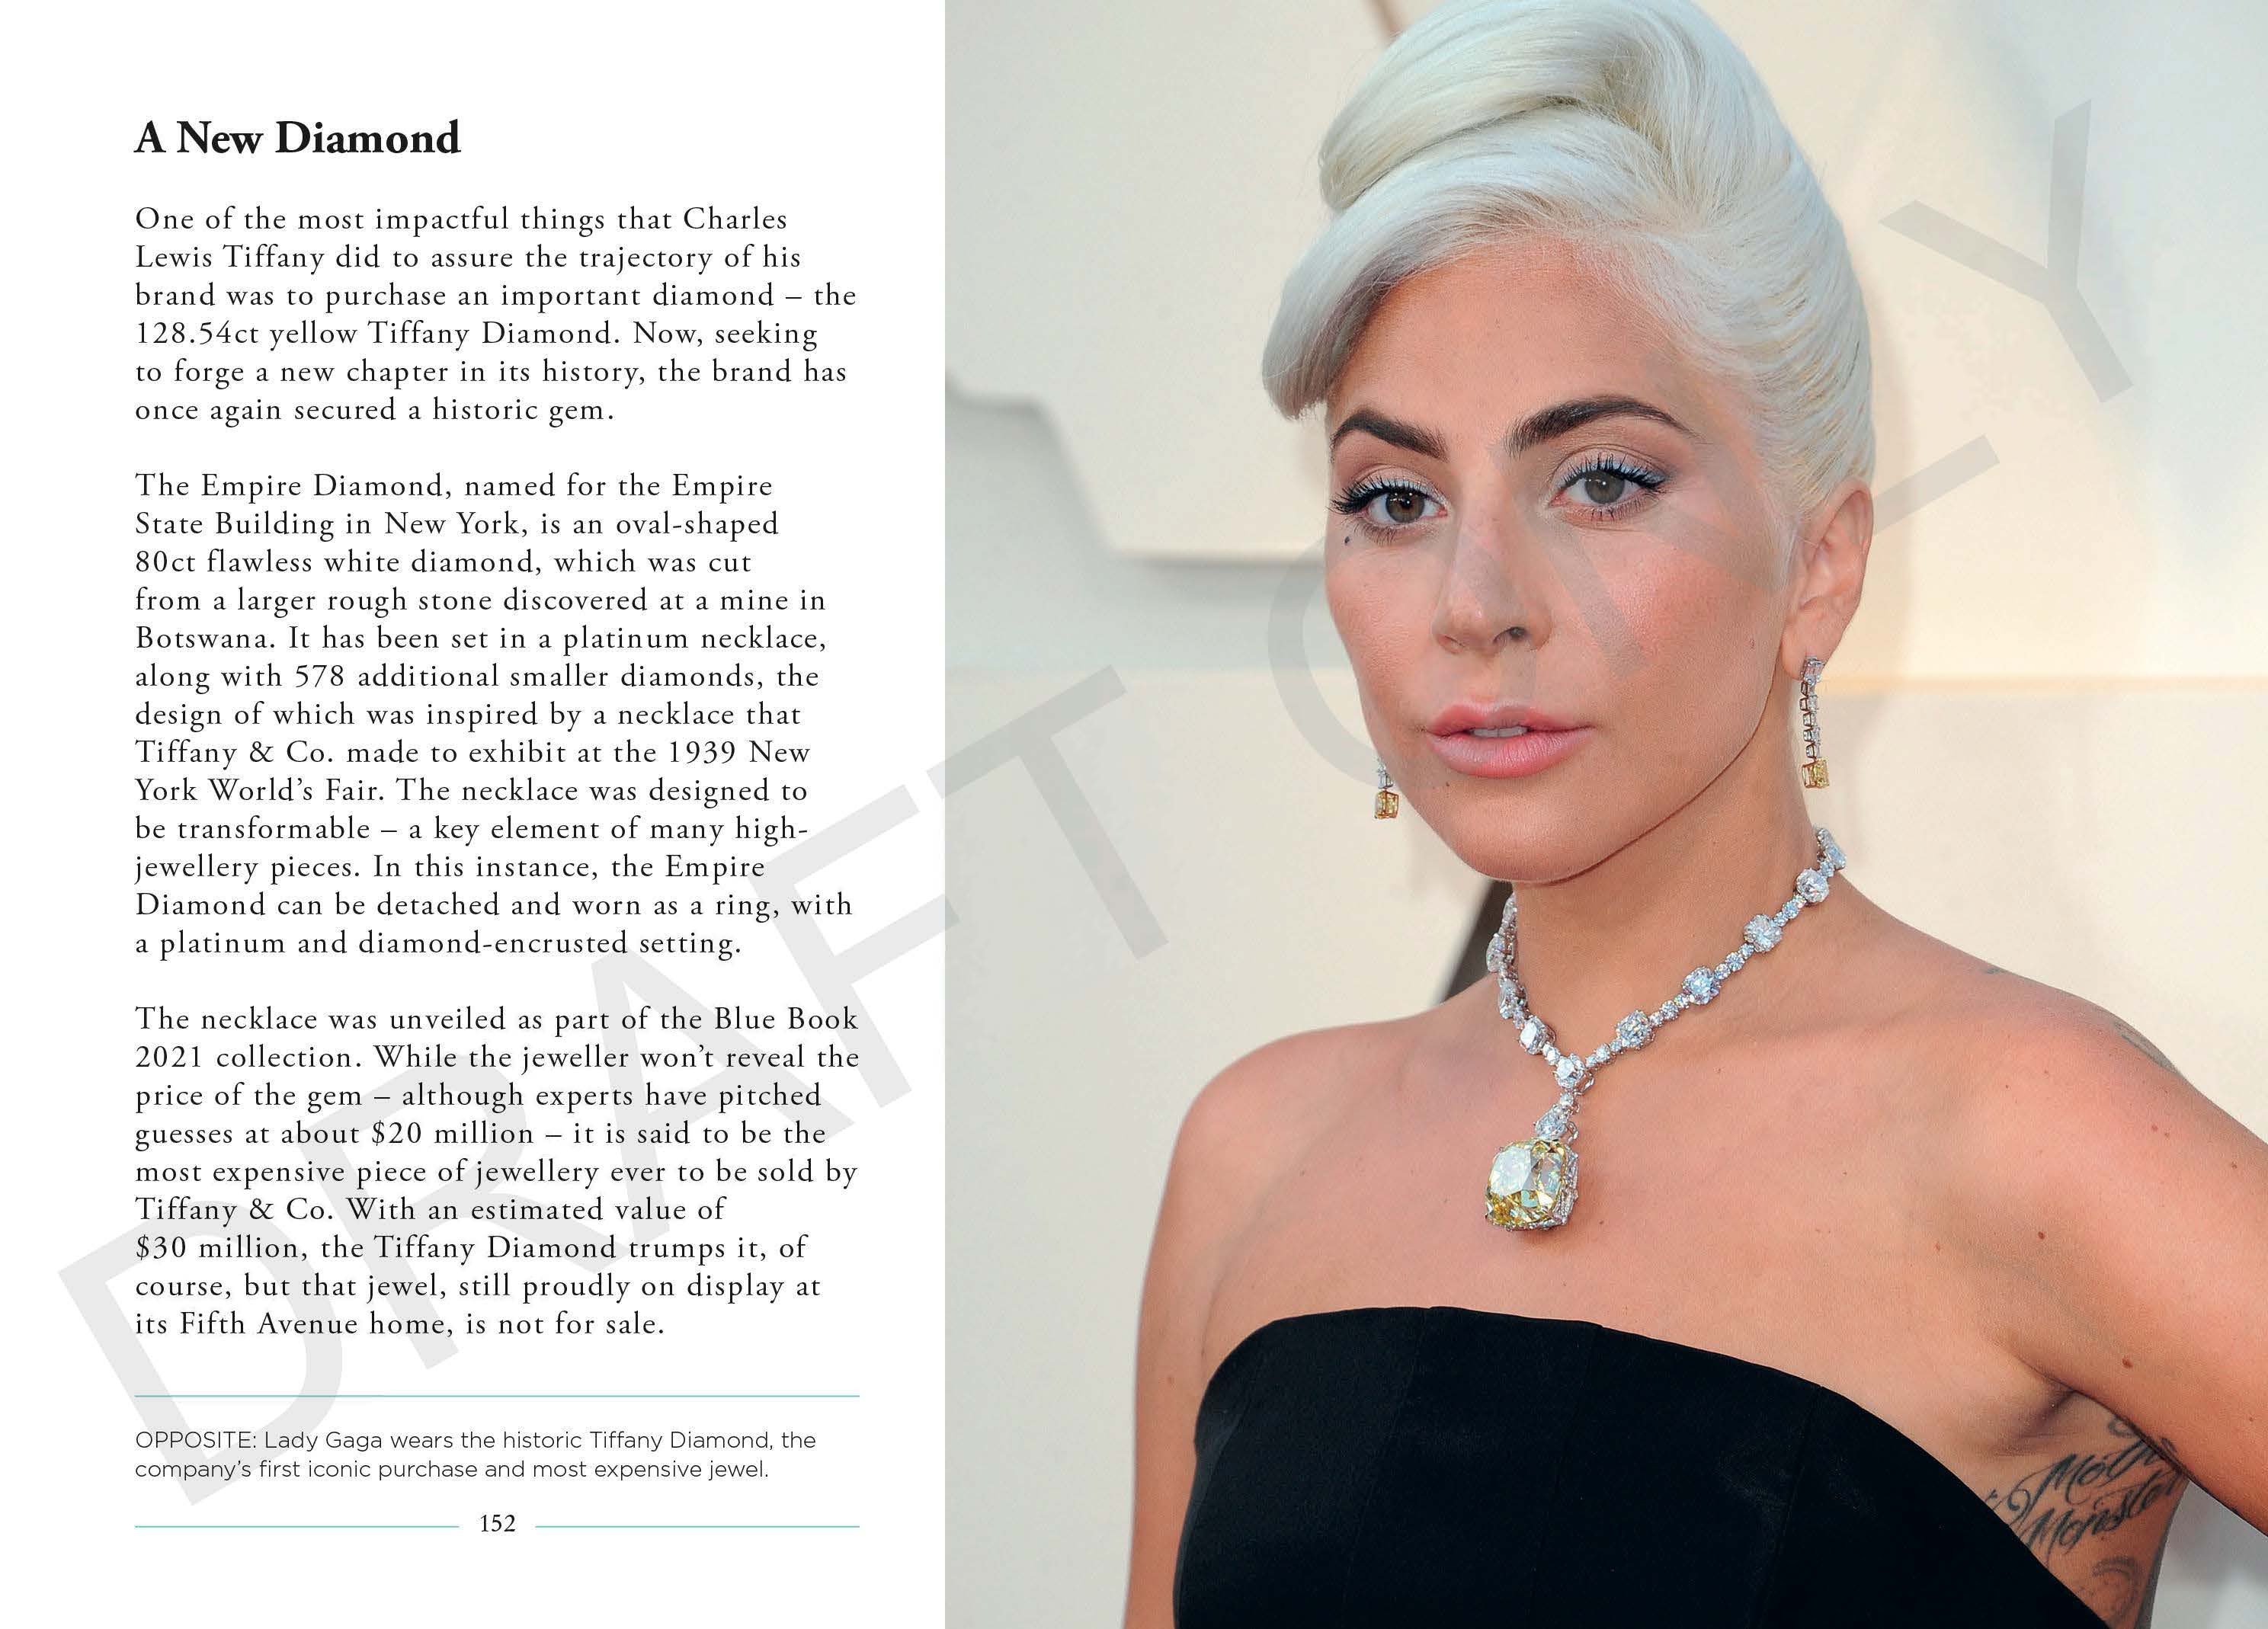 Tiffany & Co.: The Story Behind the Style - The English Bookshop Kuwait